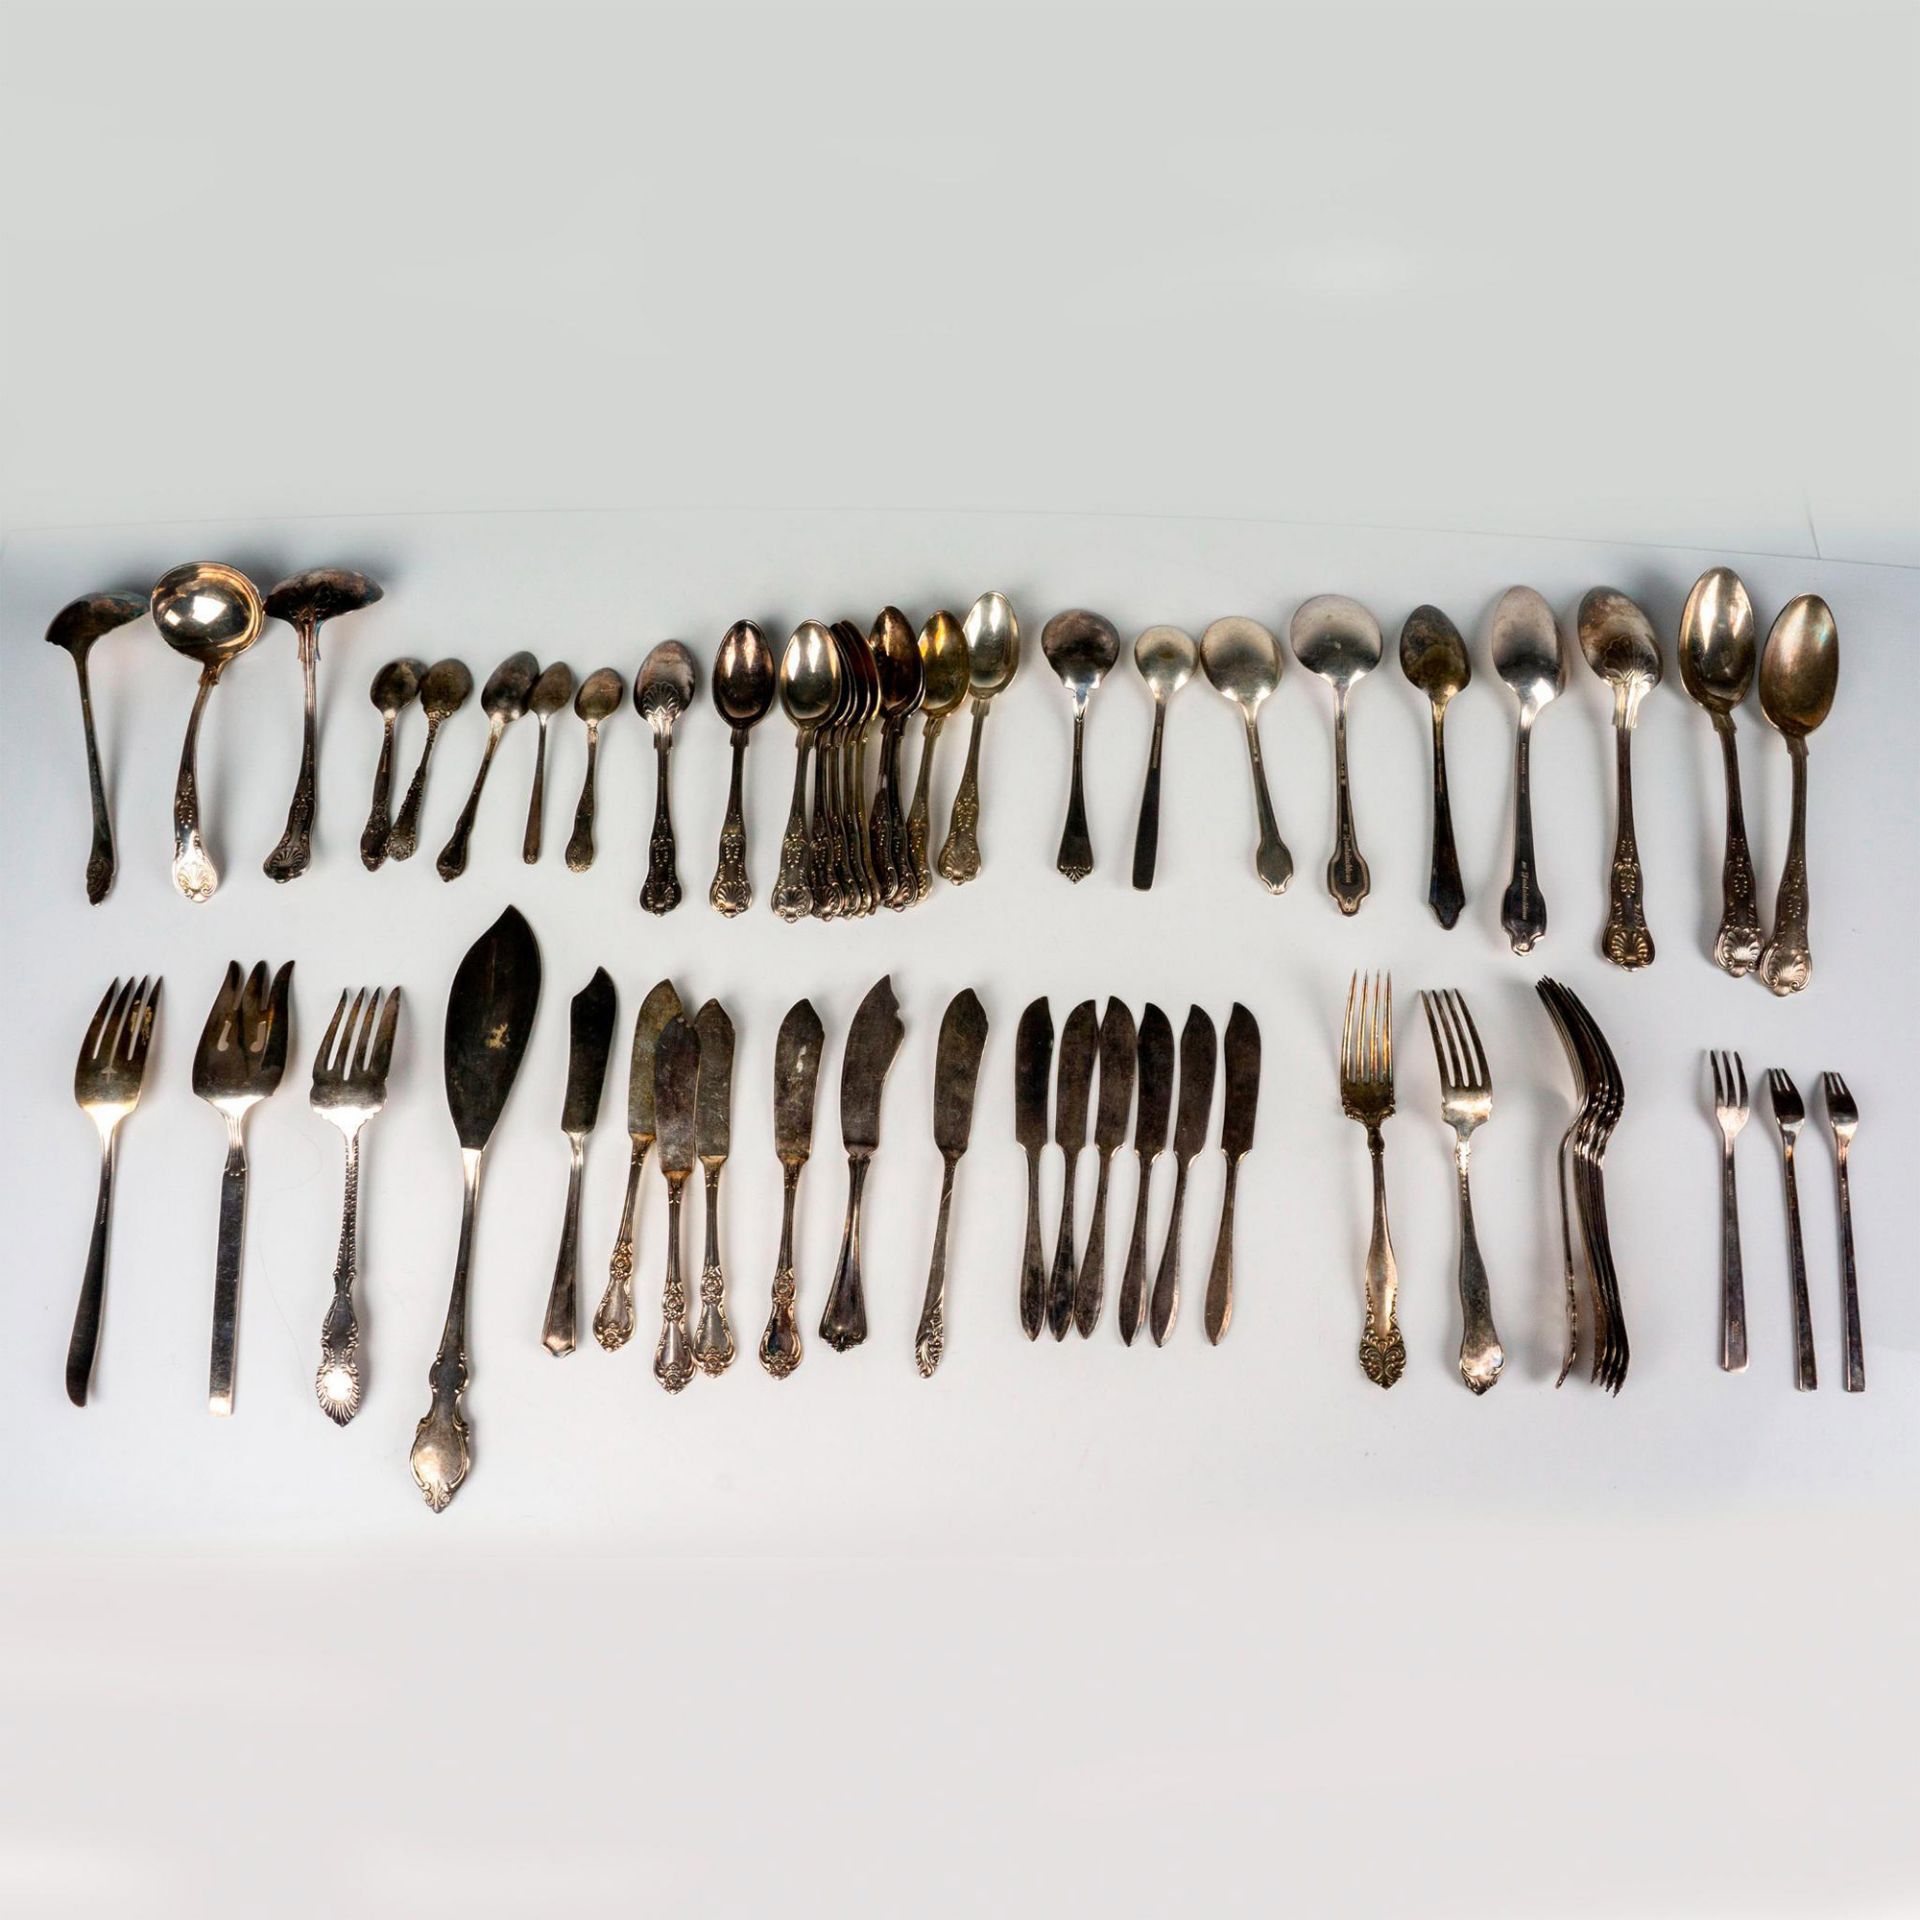 55pc Vintage Stainless Steel Flatware - Image 3 of 4